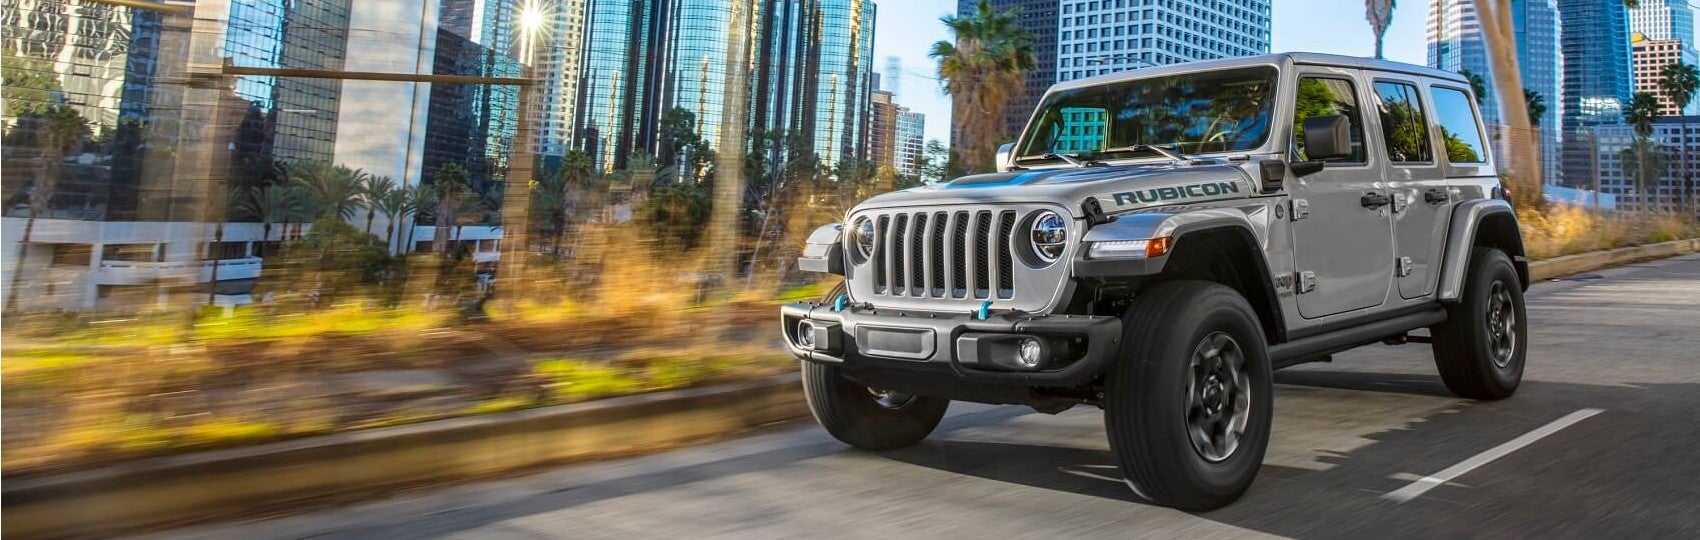 Jeep Wrangler Driving in the City